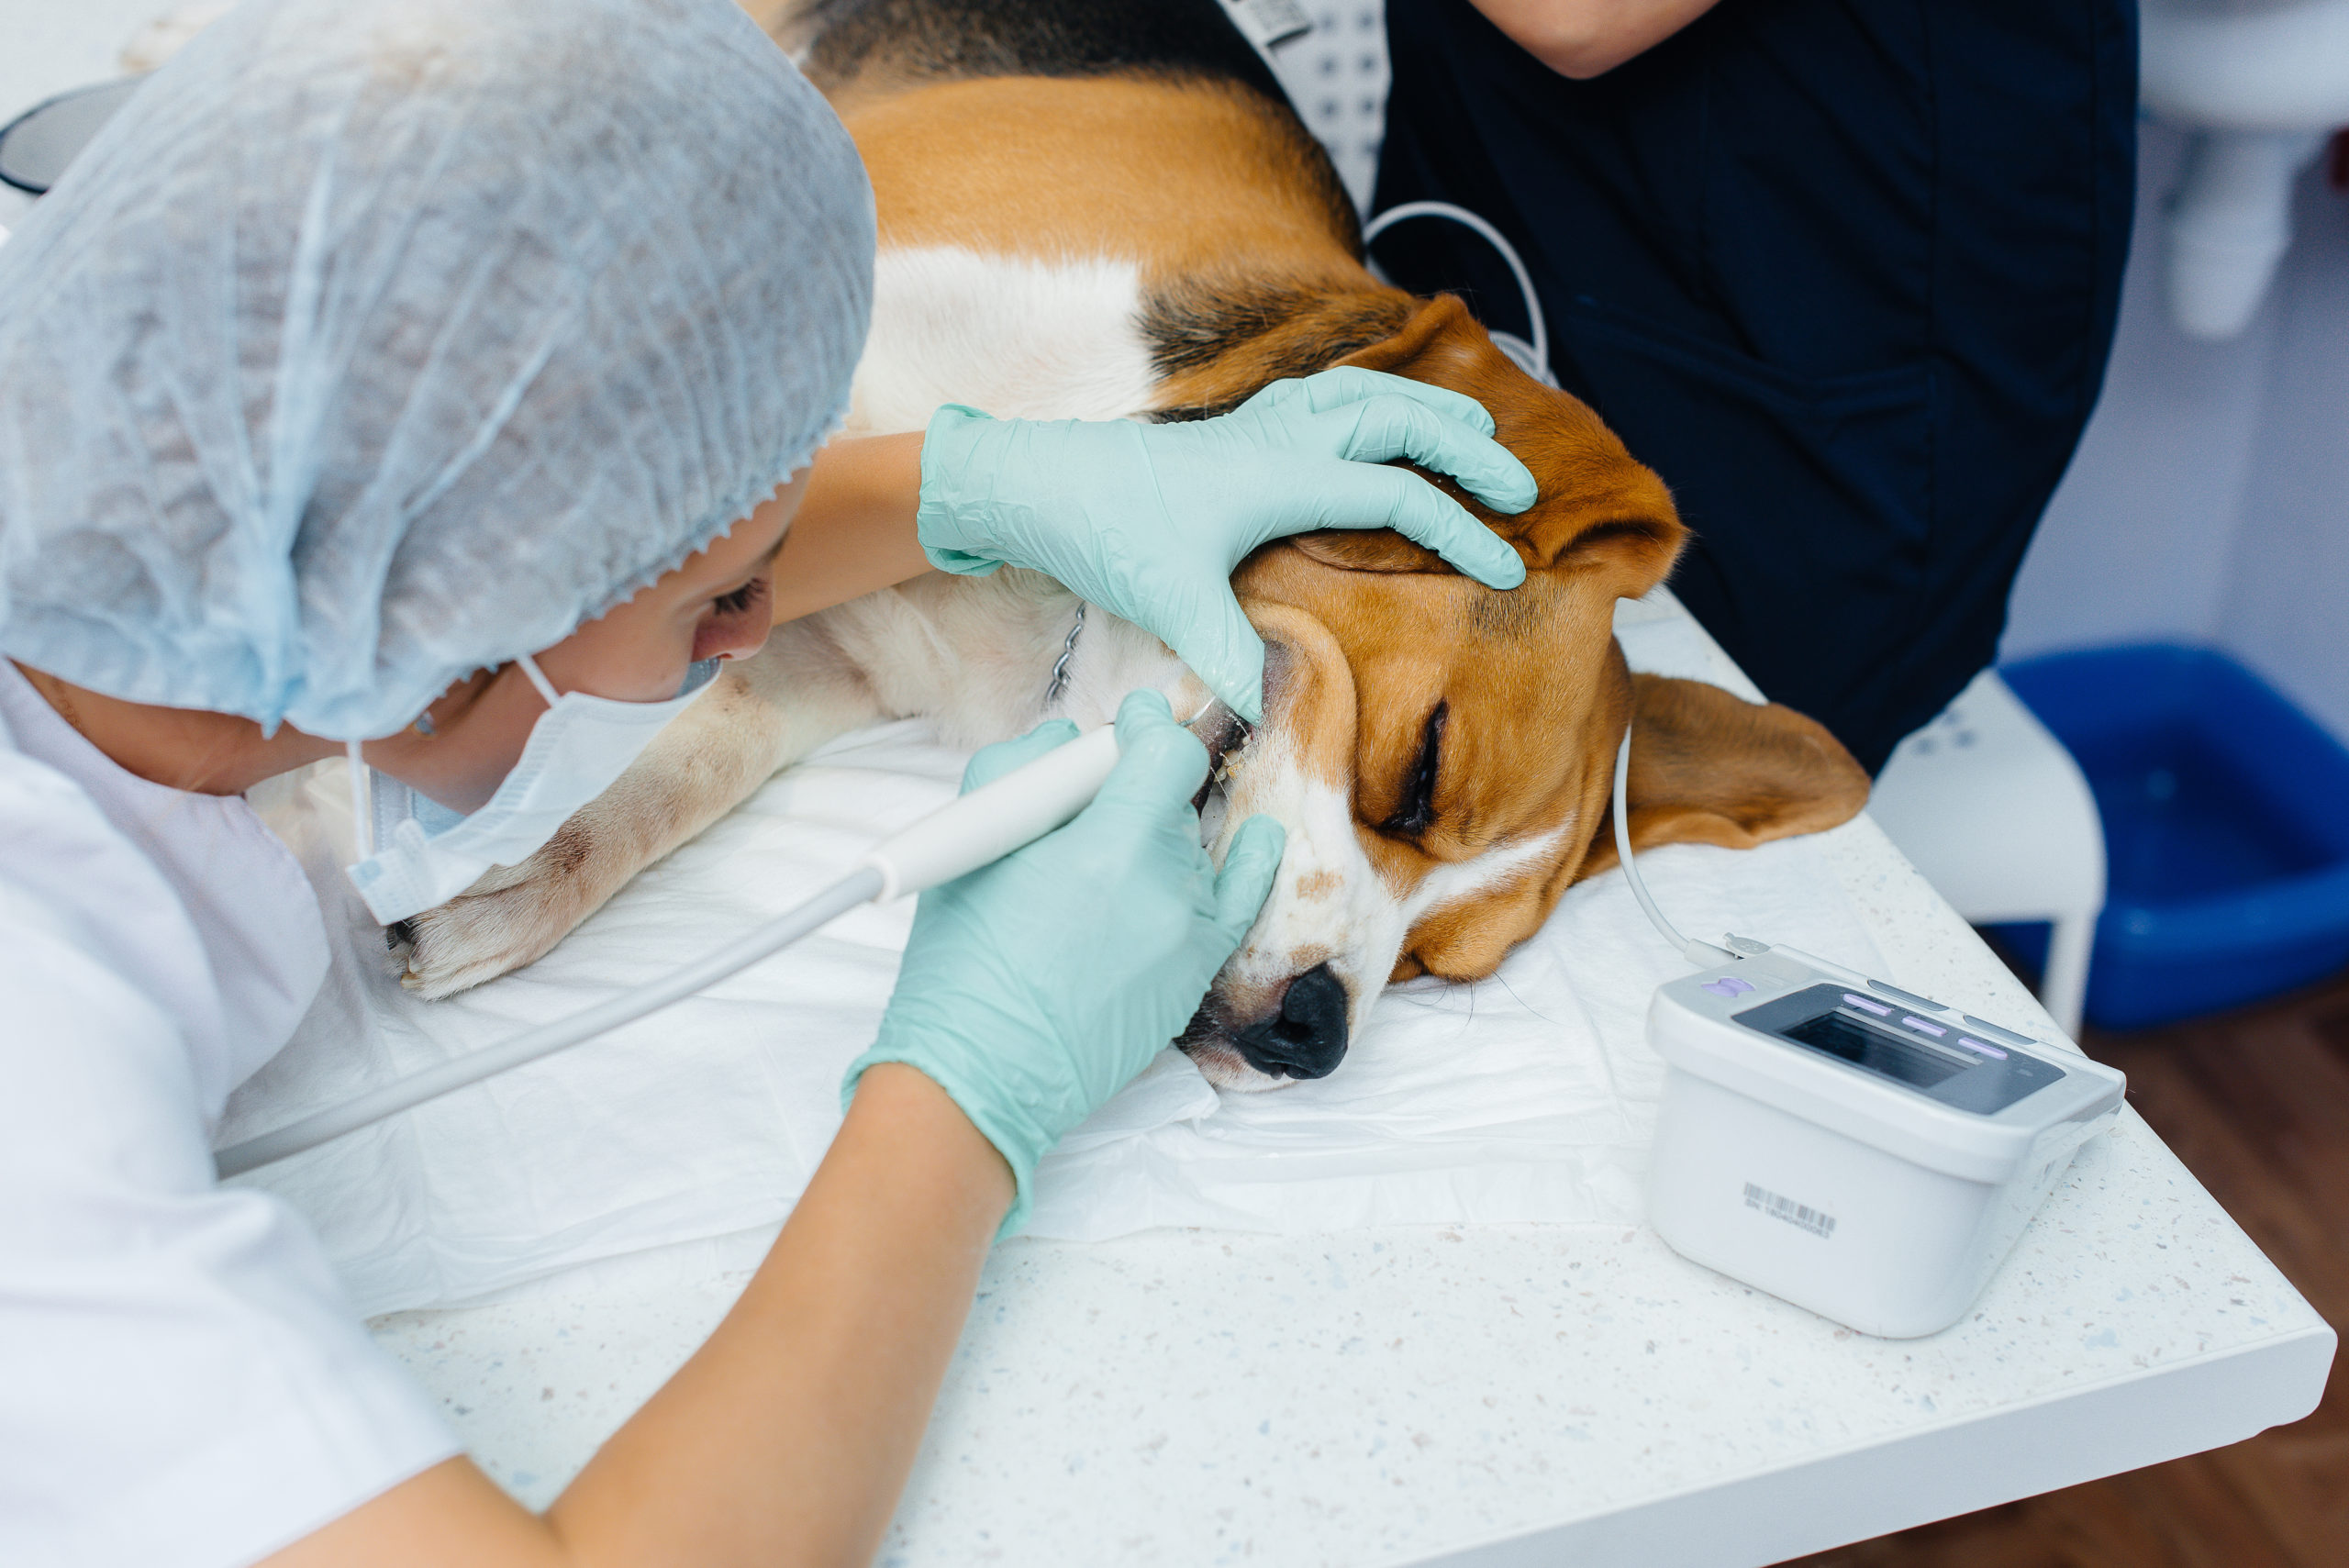 A beautiful thoroughbred dog is given dental cleaning and dental procedures in a modern veterinary clinic